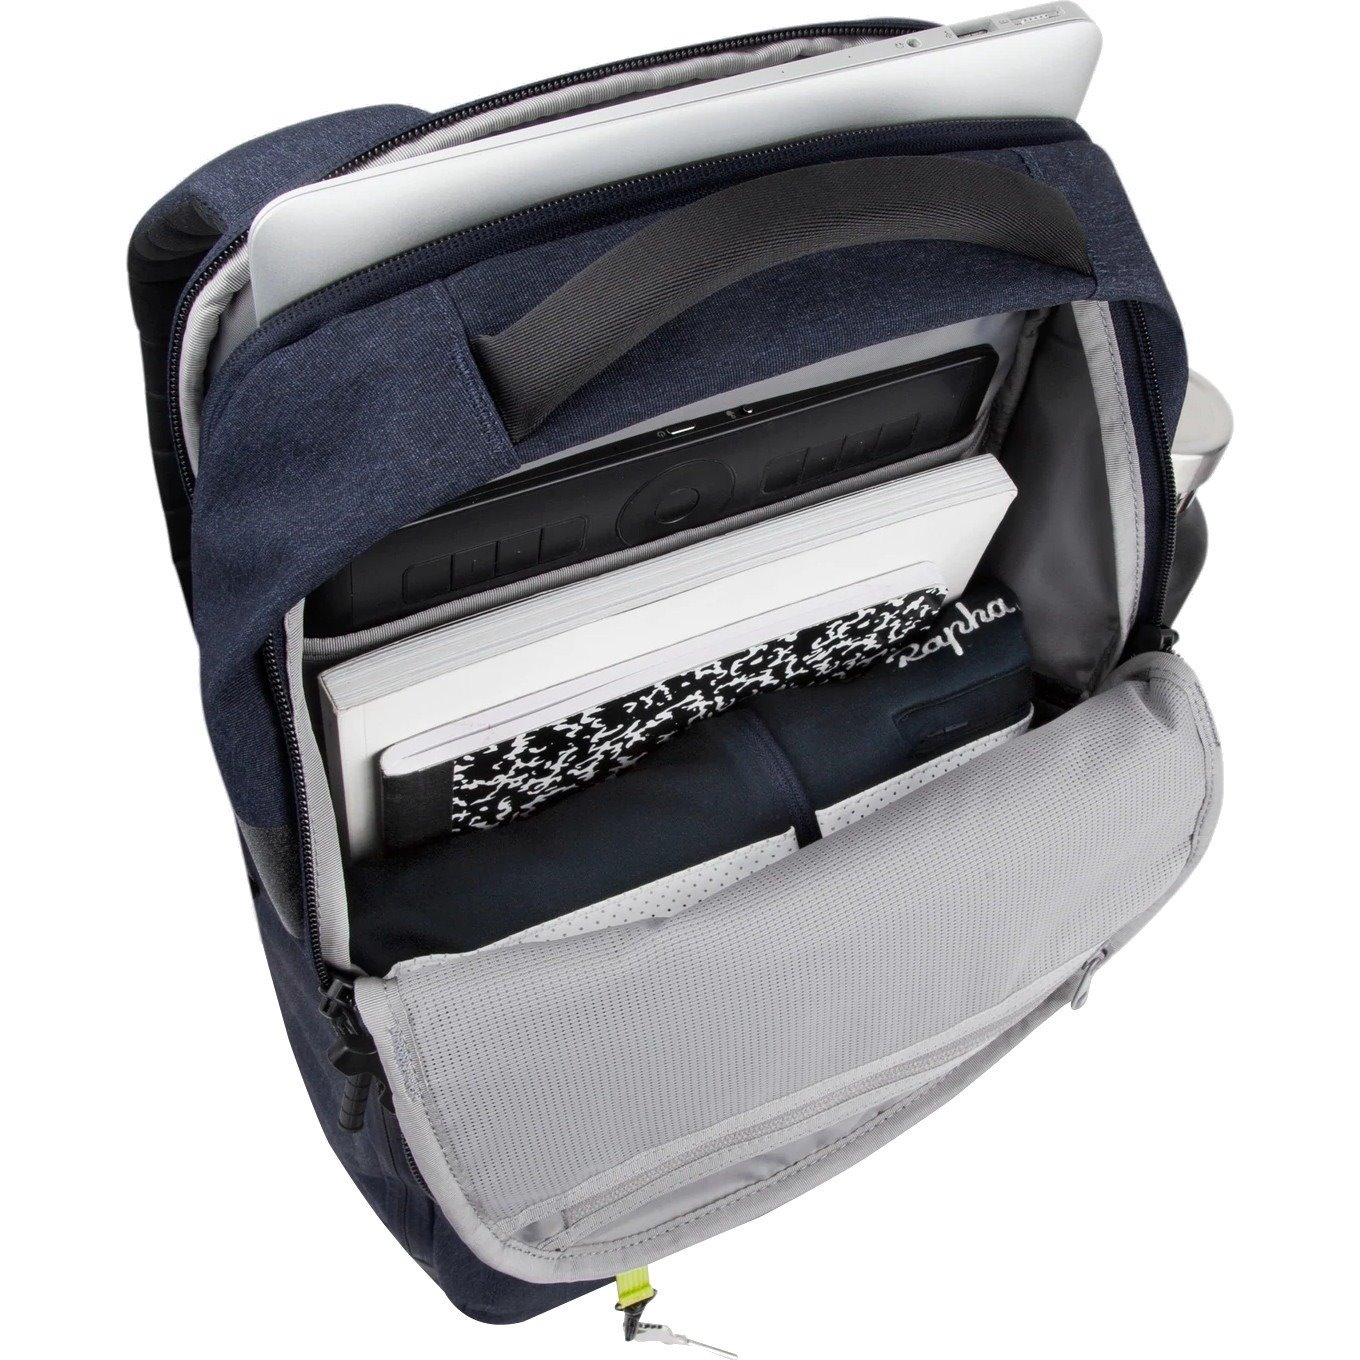 Timbuk2 Division Carrying Case (Backpack) for 15" Notebook - Eco Nightfall